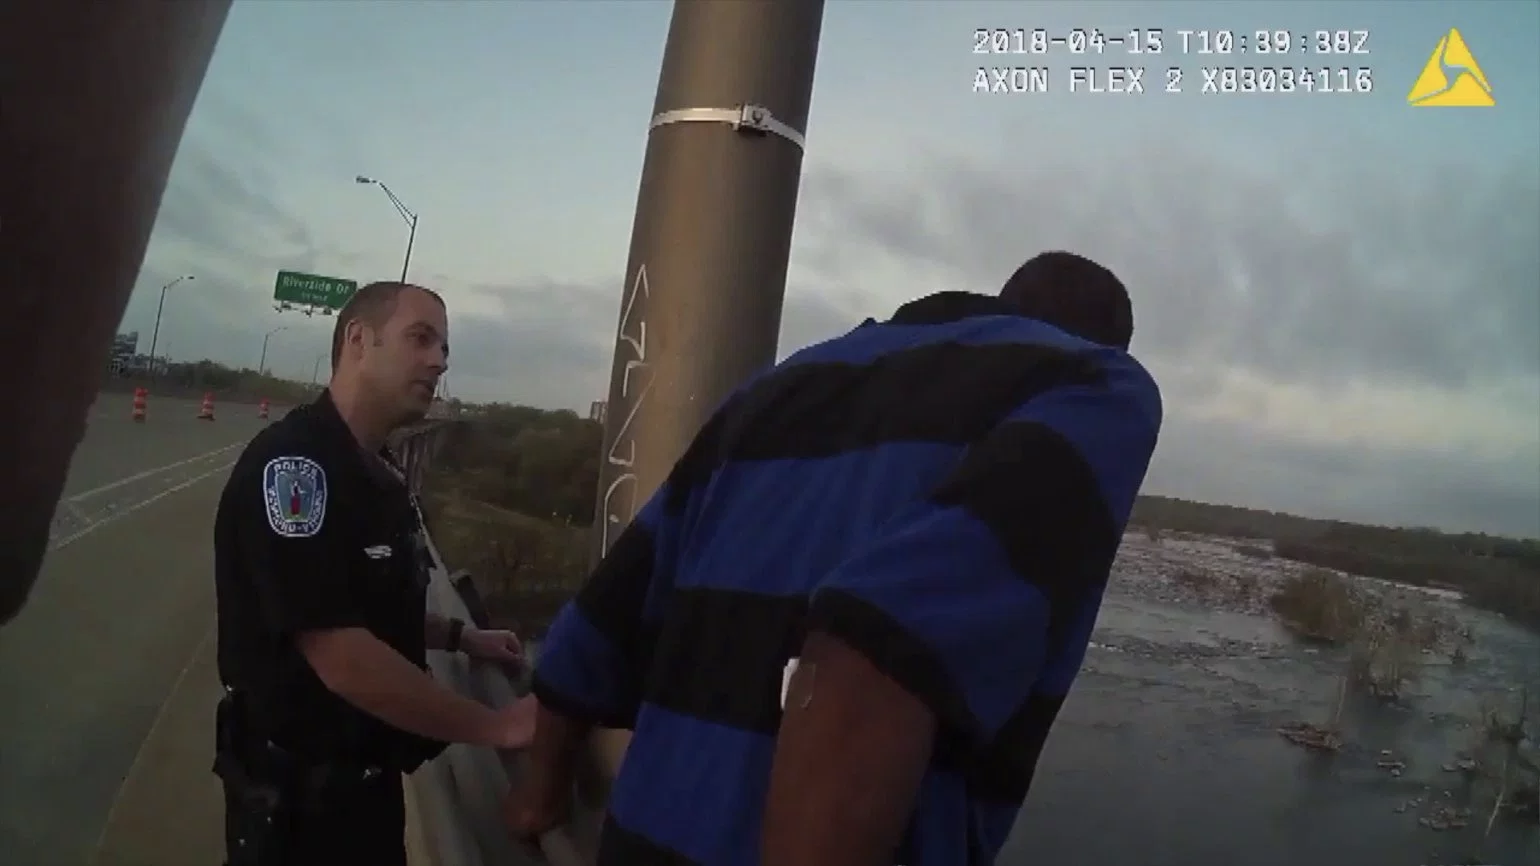 Police officers save a man from jumping off bridge